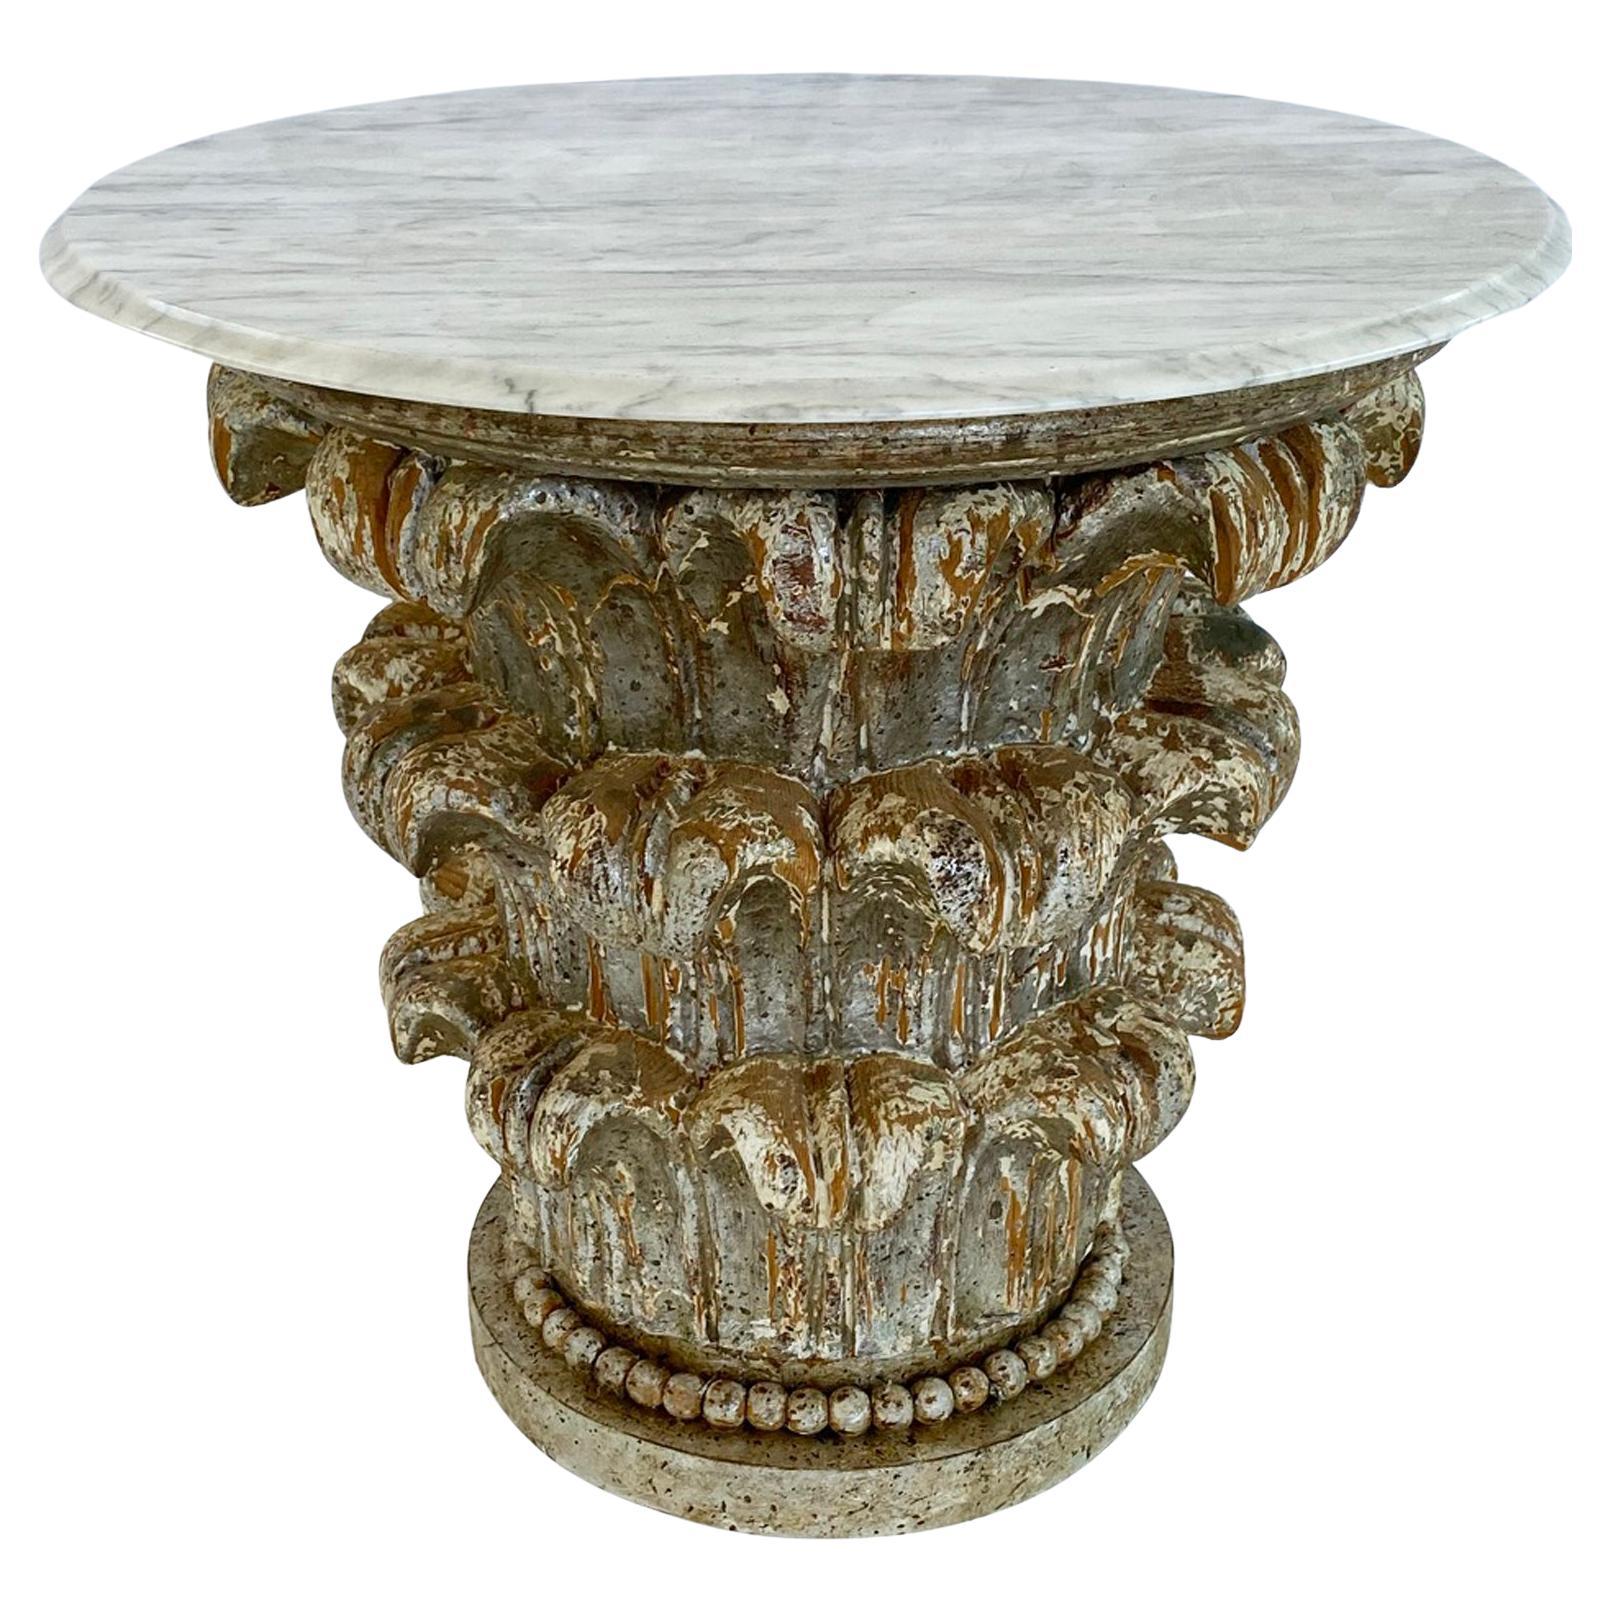 Carved Corinthian Capital Side Table with Round Carrara Marble Top